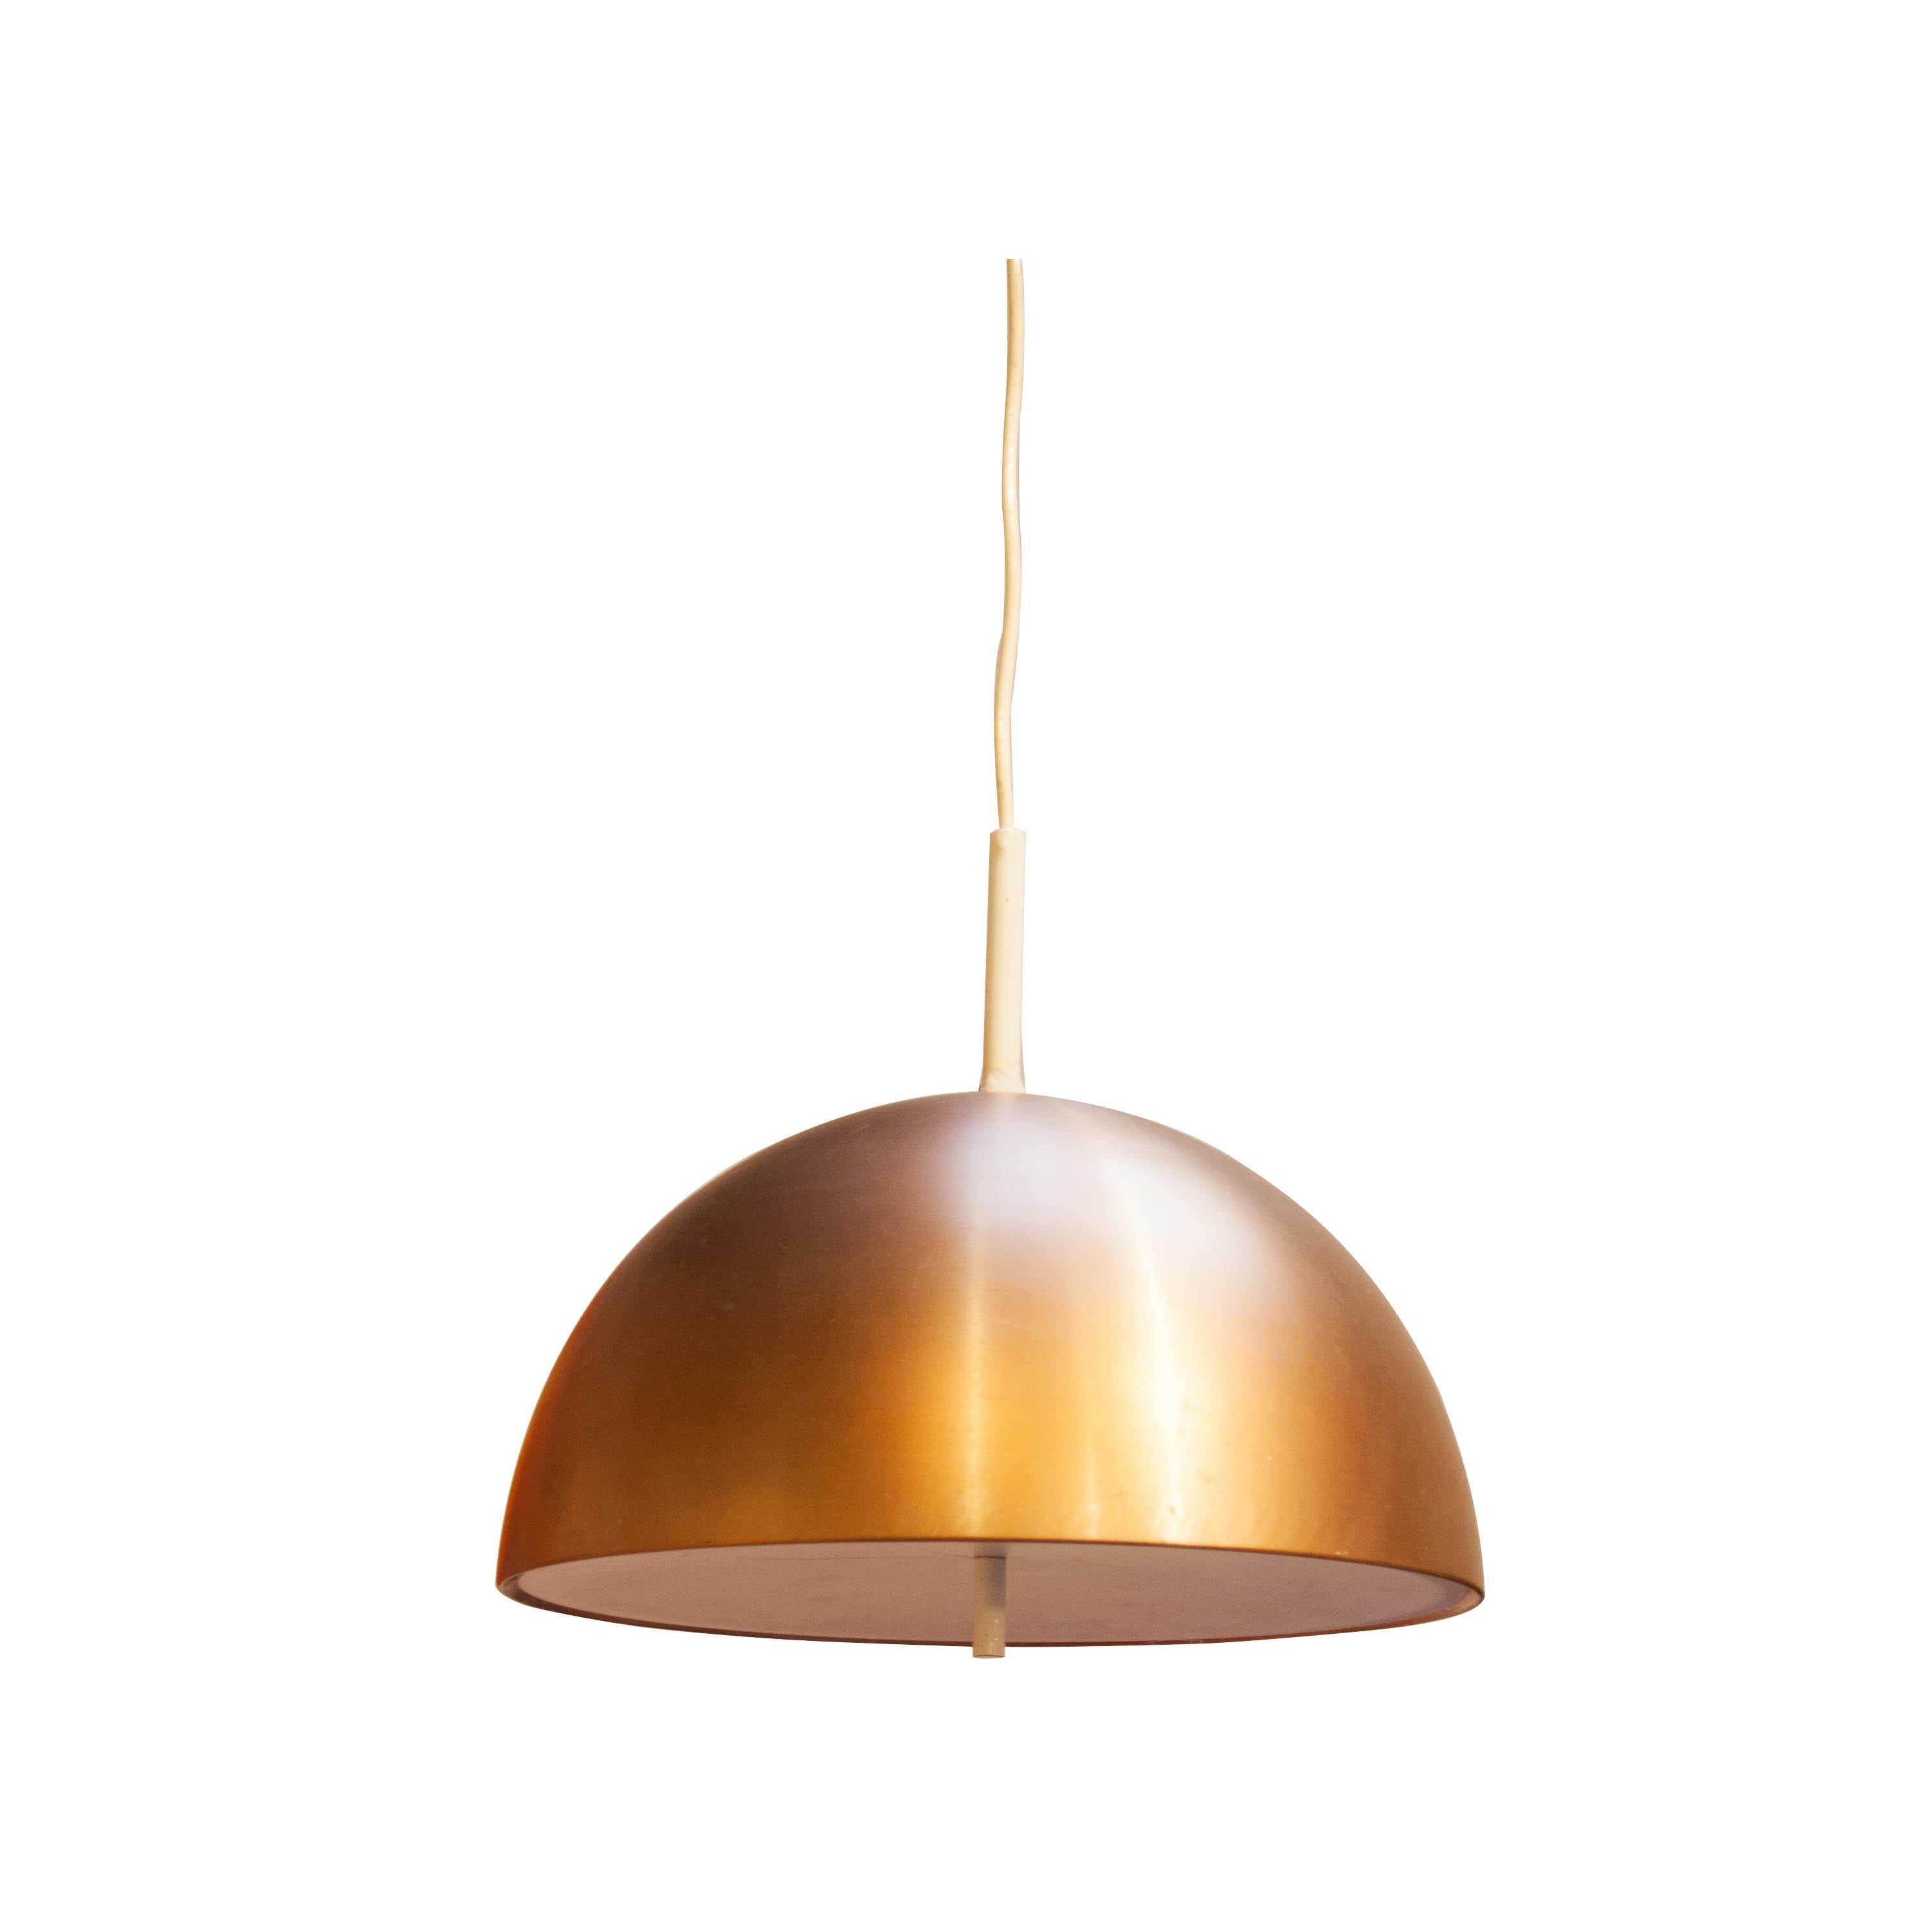 Ceiling lamp whit metalic structure and copper coating.